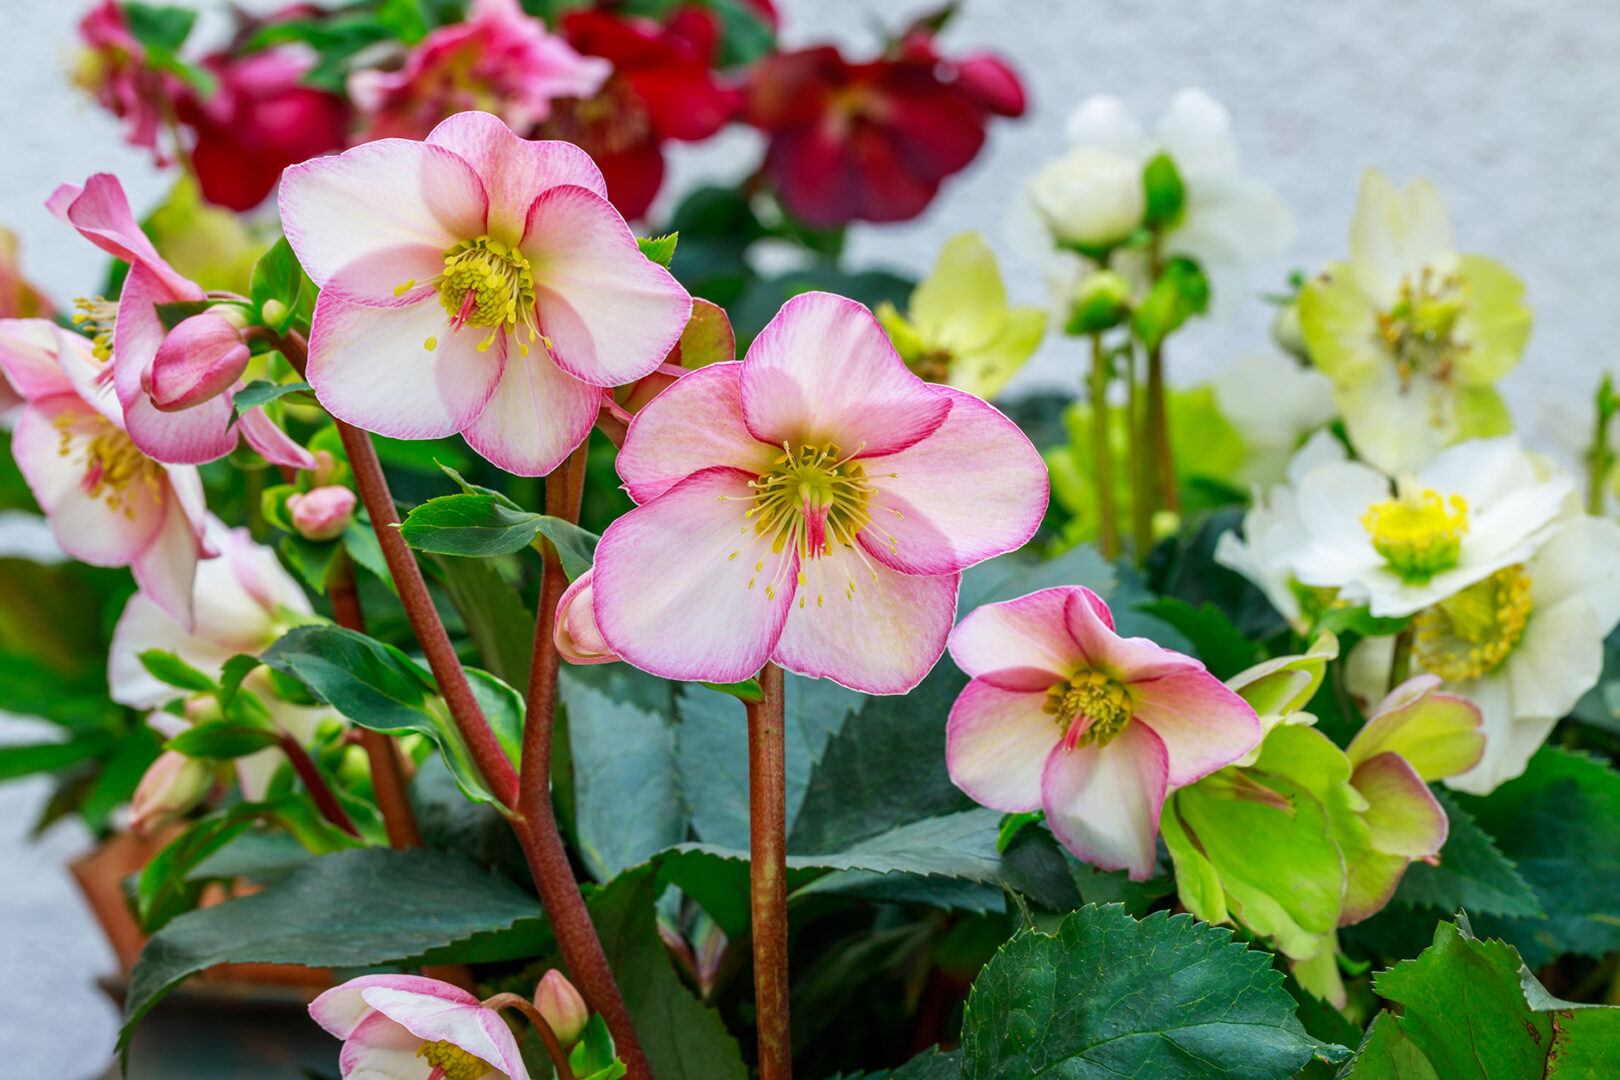 A collection of hellebore plants